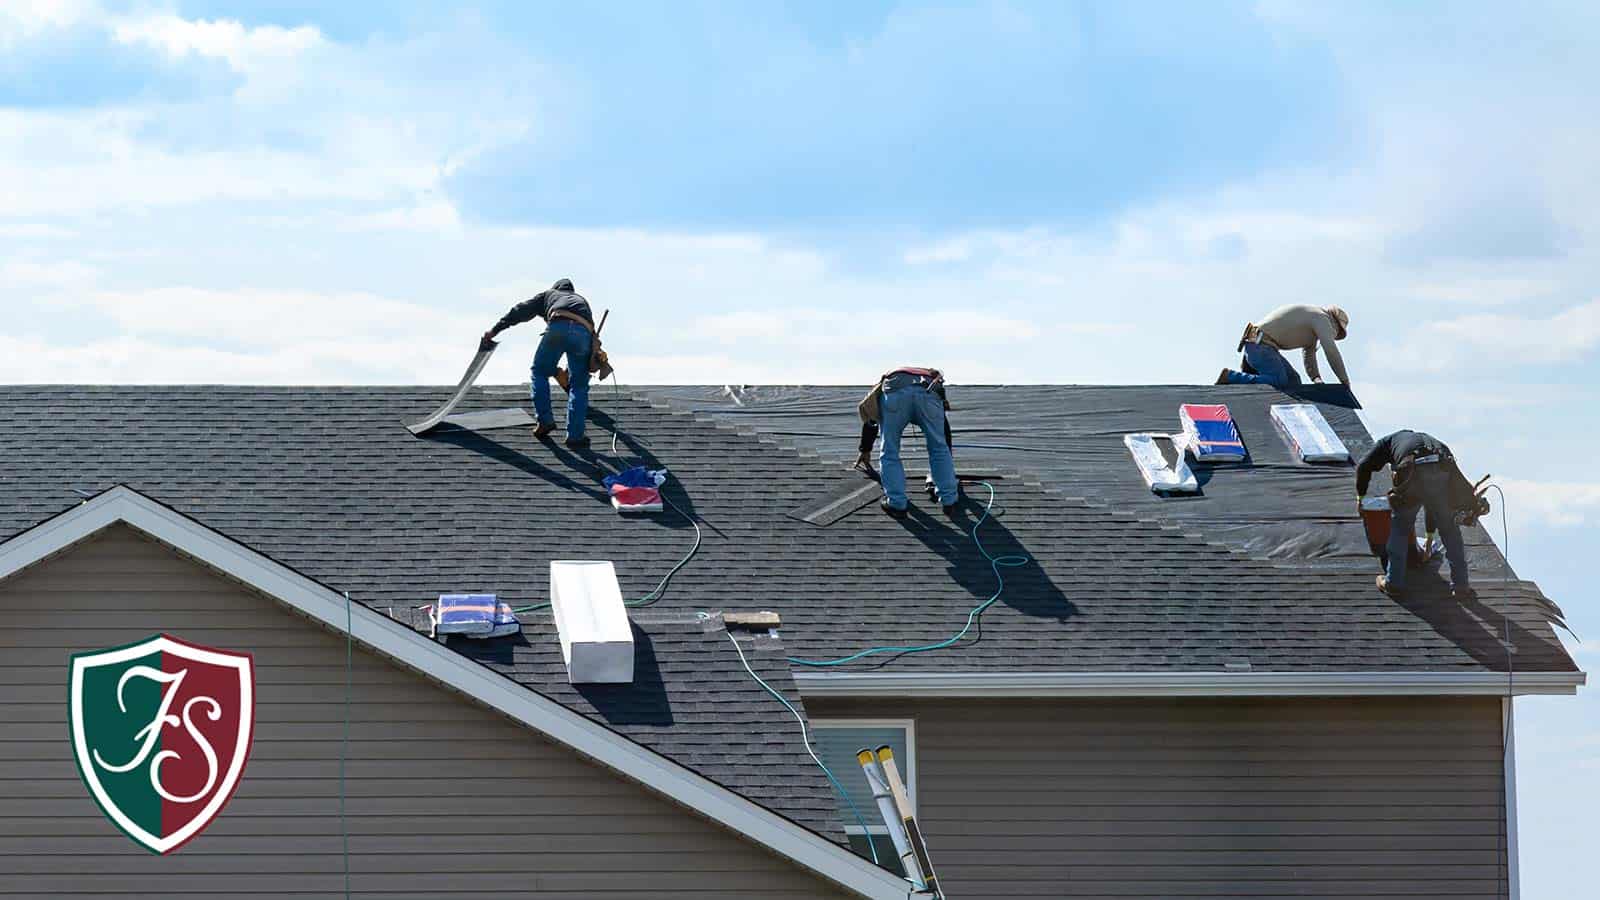 Replacing or repairing composition shingles isn’t too difficult, but you still might want to use professional roofing contractors, especially for bigger jobs.